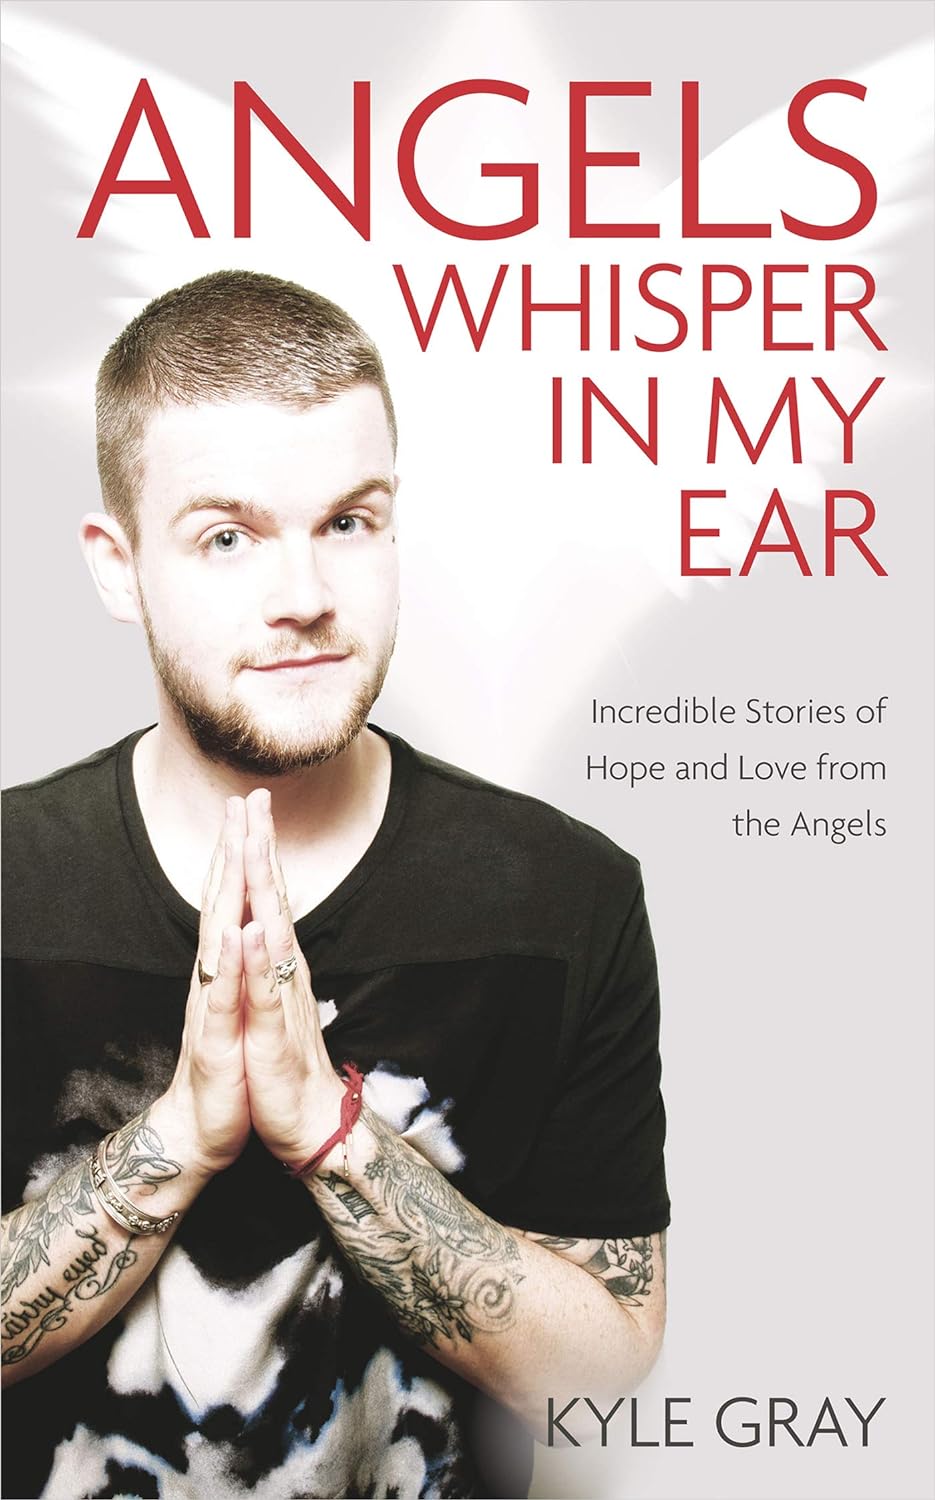 Angels Whisper in My Ear: Incredible Stories of Hope and Love from the Angels by Kyle Gray